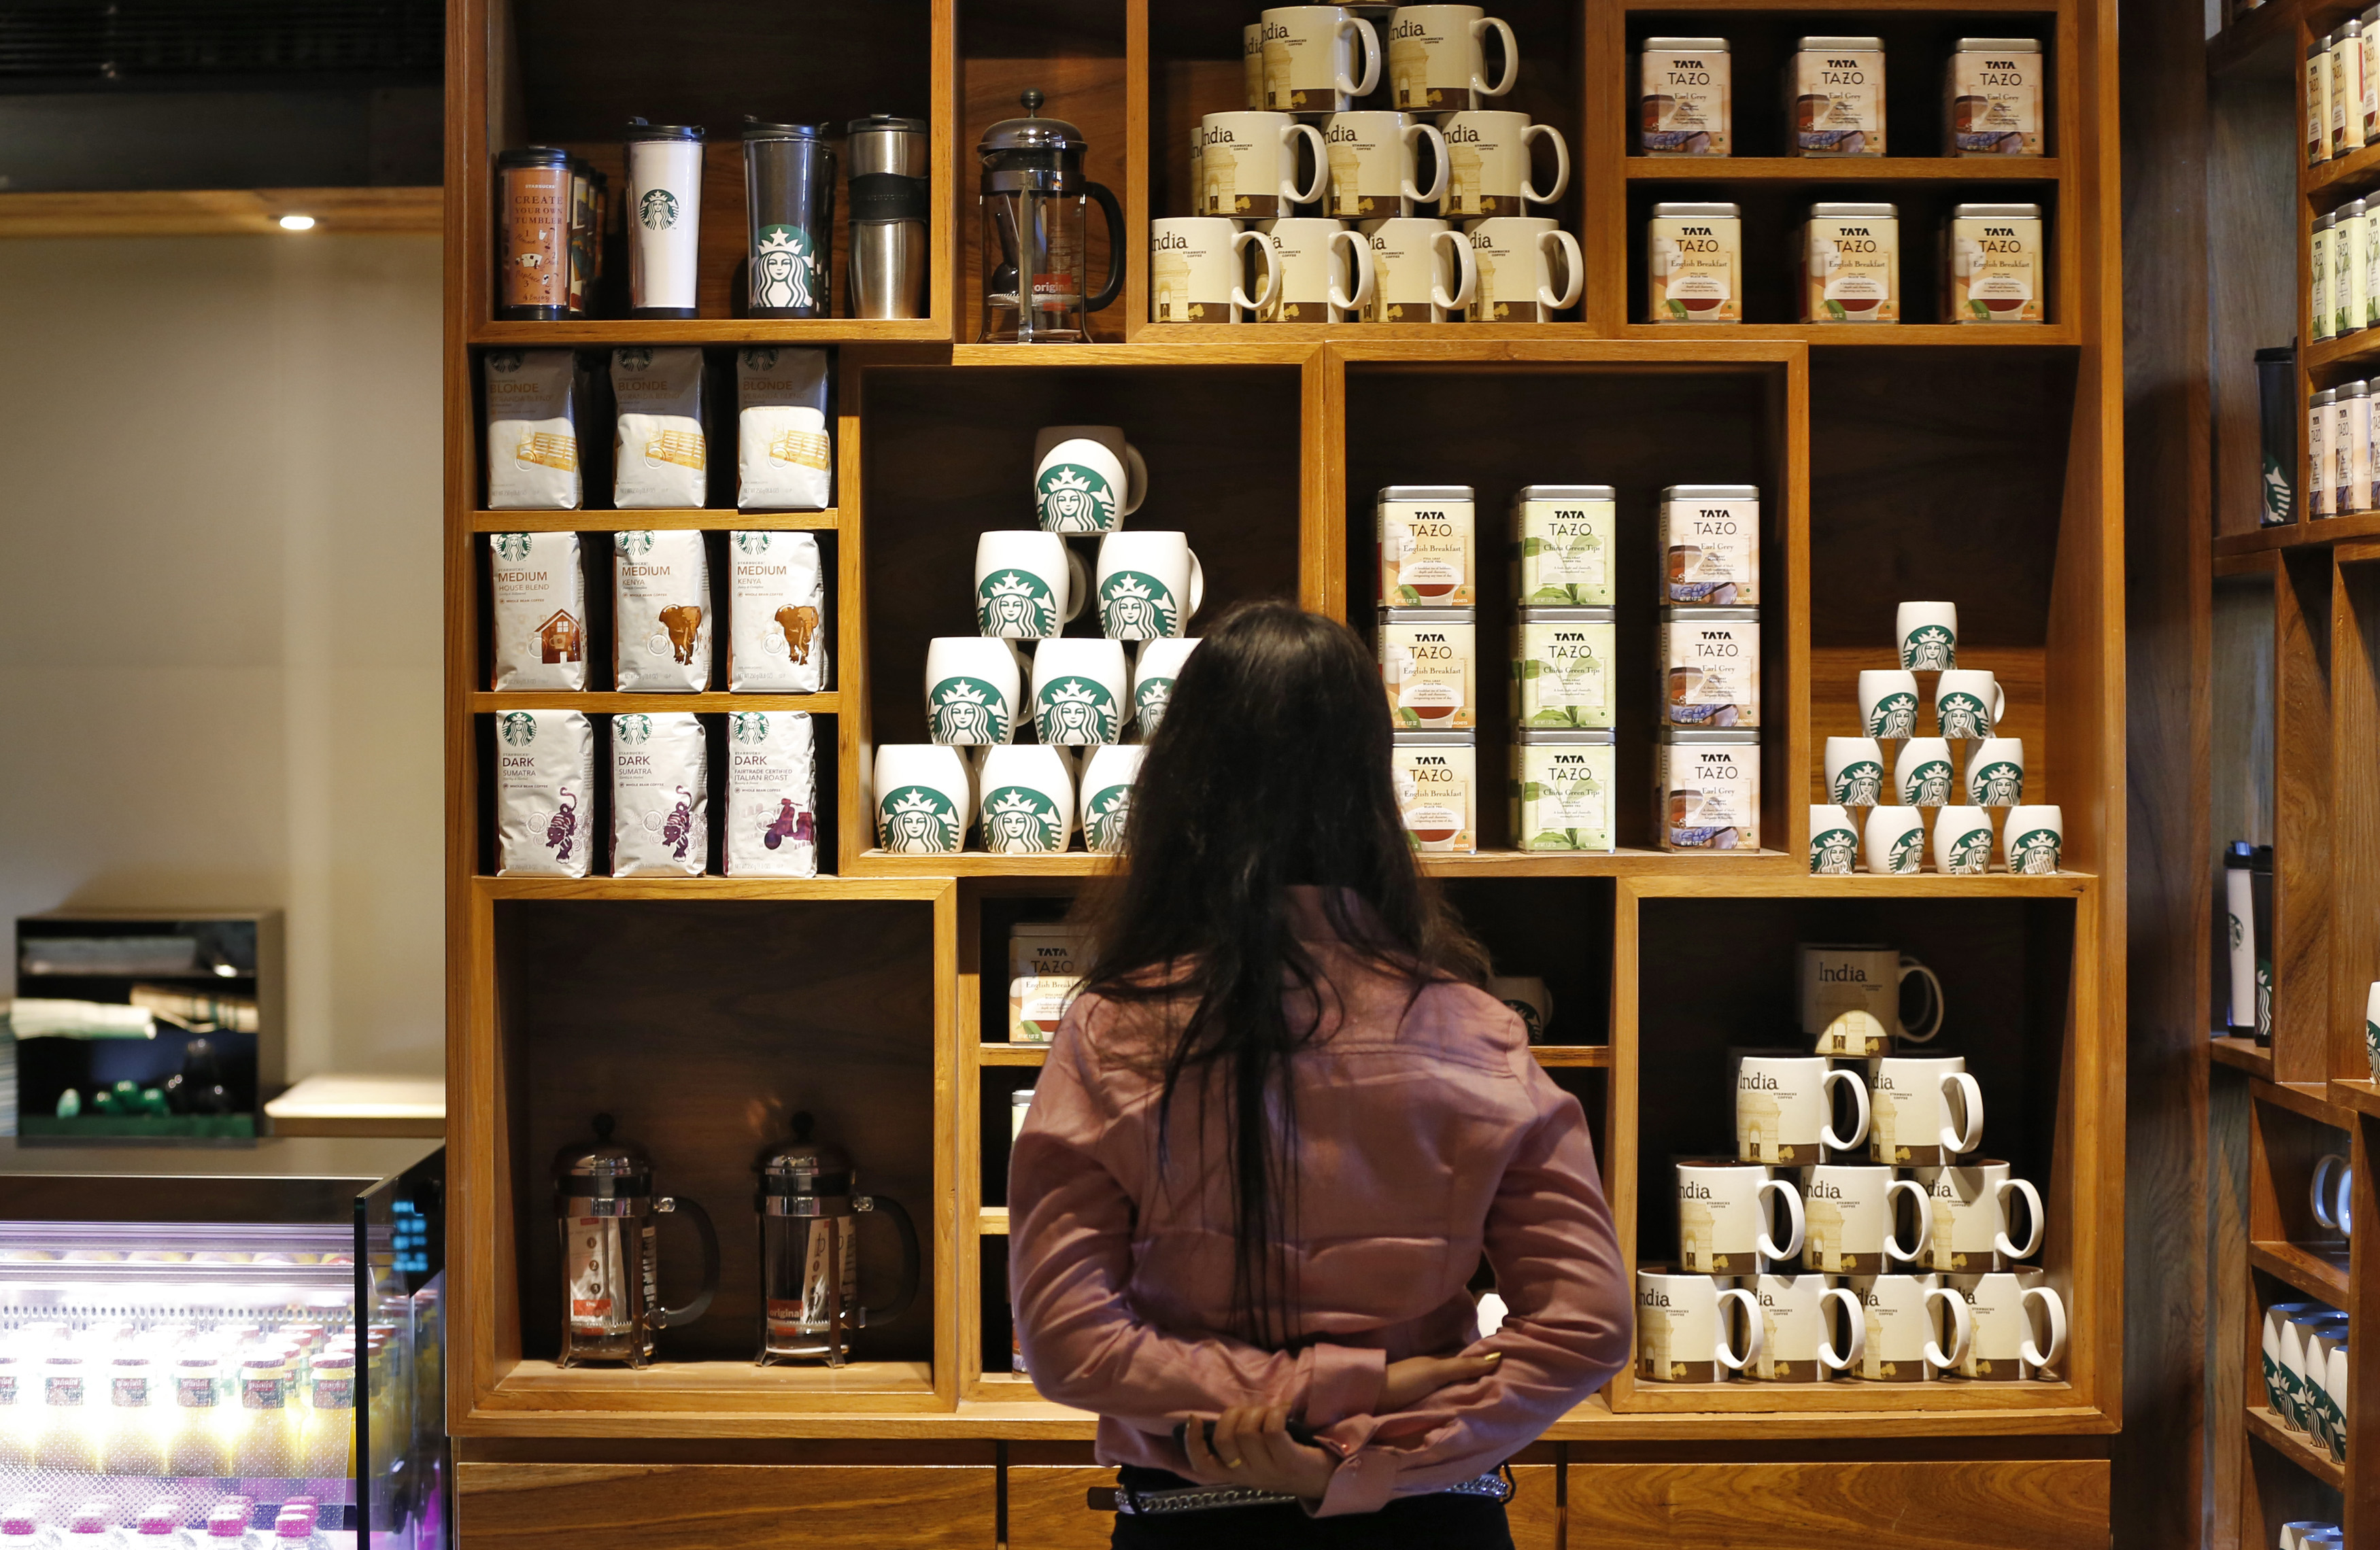 A visitor looks at products on display during the launch of the first Starbucks store in New Delhi, Feb. 6, 2013 (Adnan Abidi—Reuters)